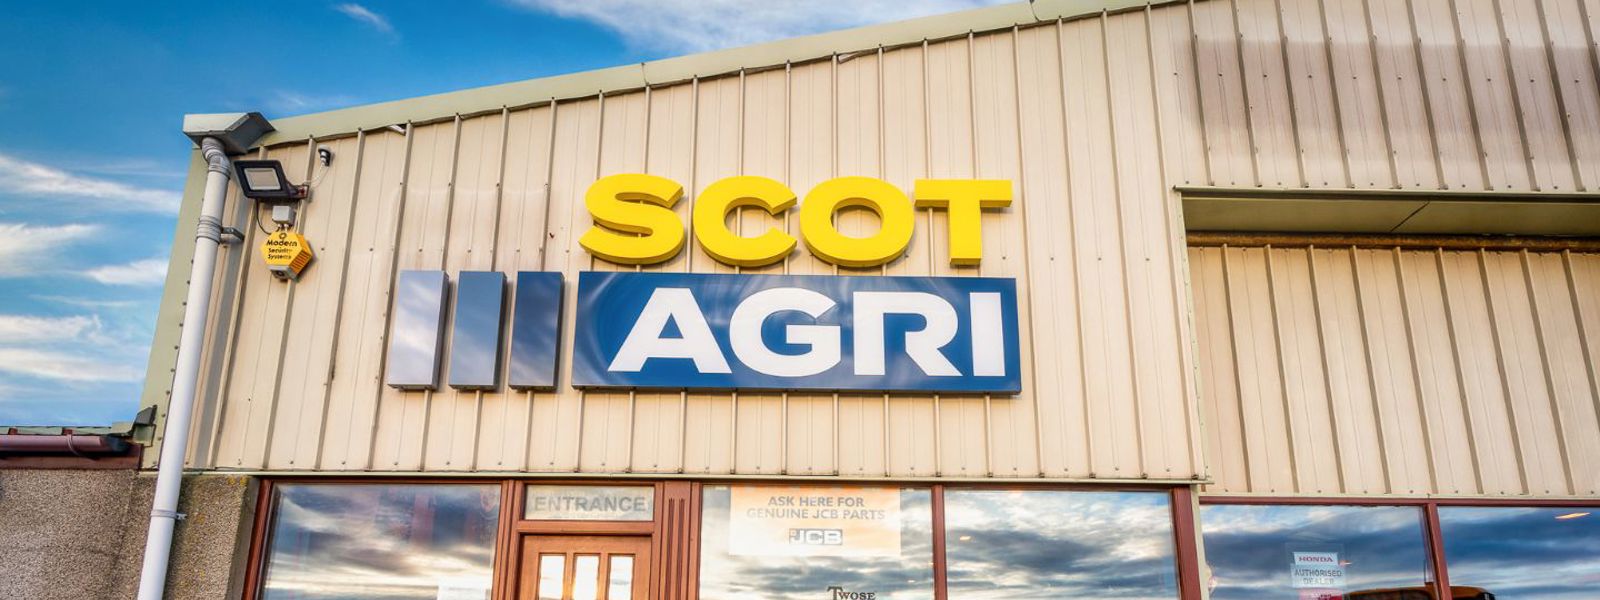 Scot Agri Frontage Banner